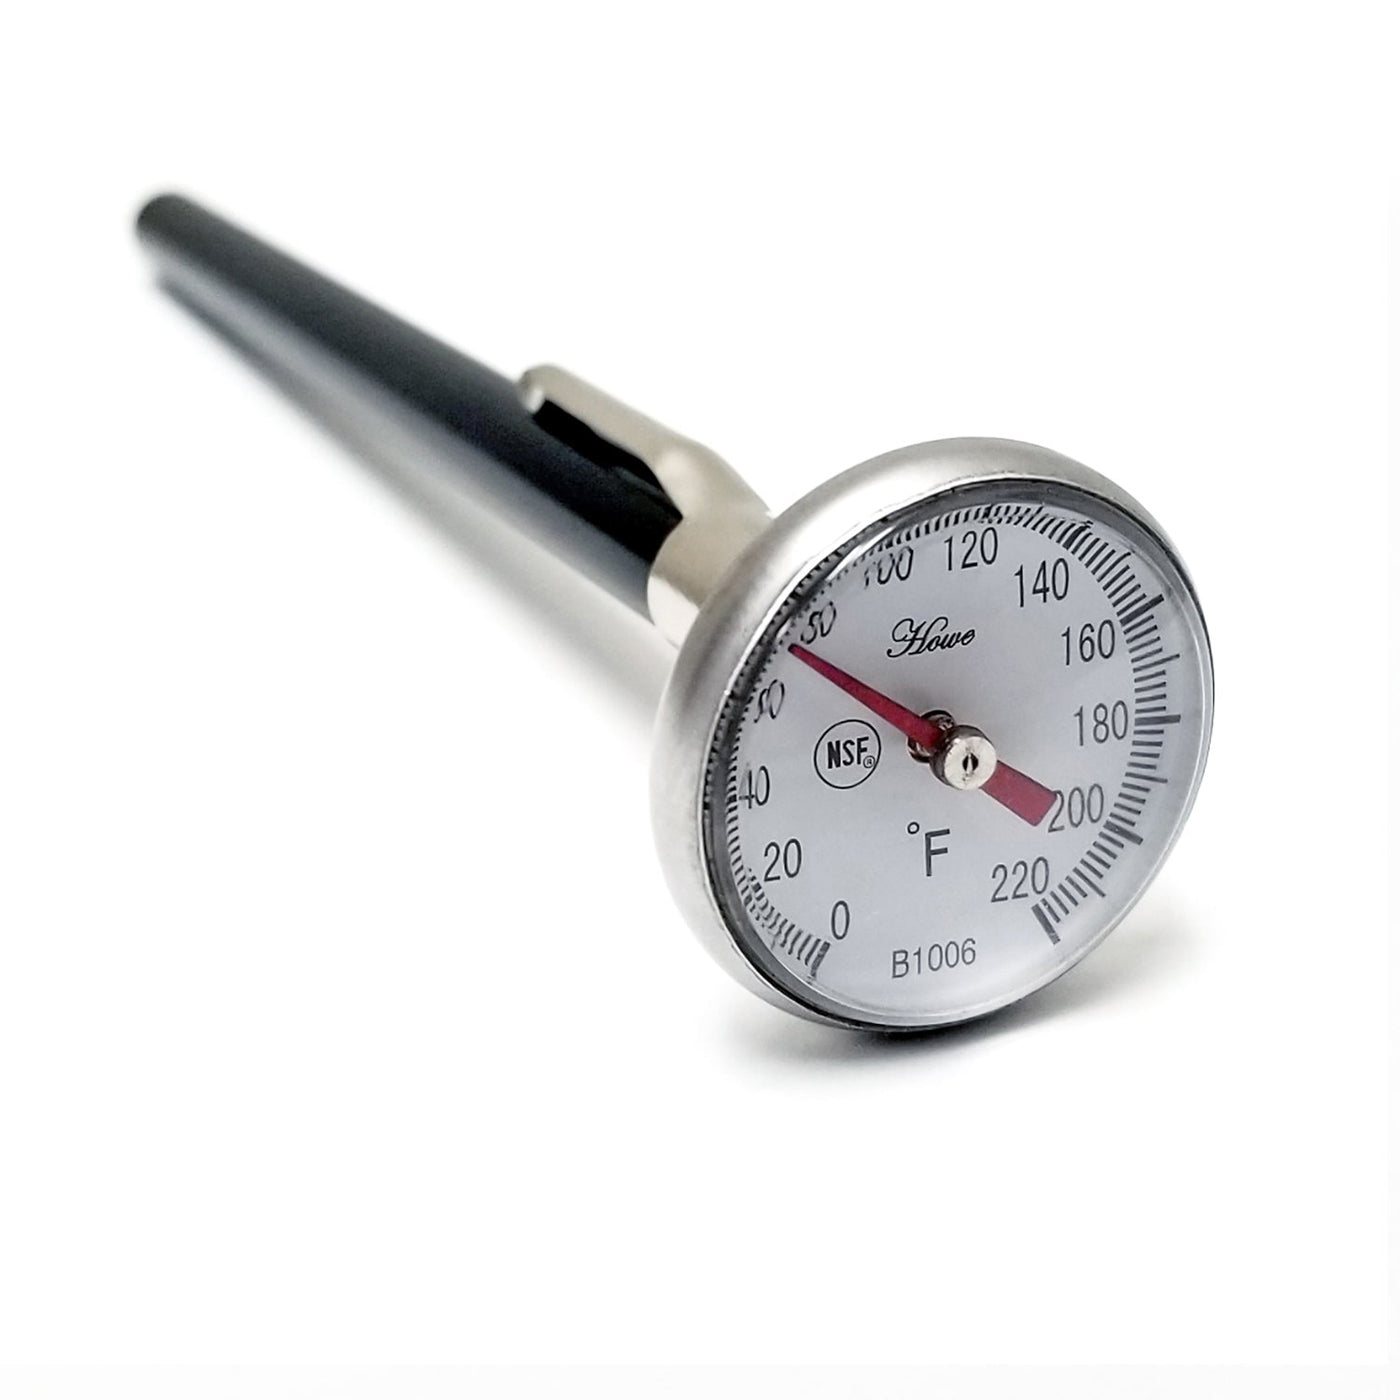 Hot Dog Accessories  Food Thermometer - Gold Medal #8000 – Gold